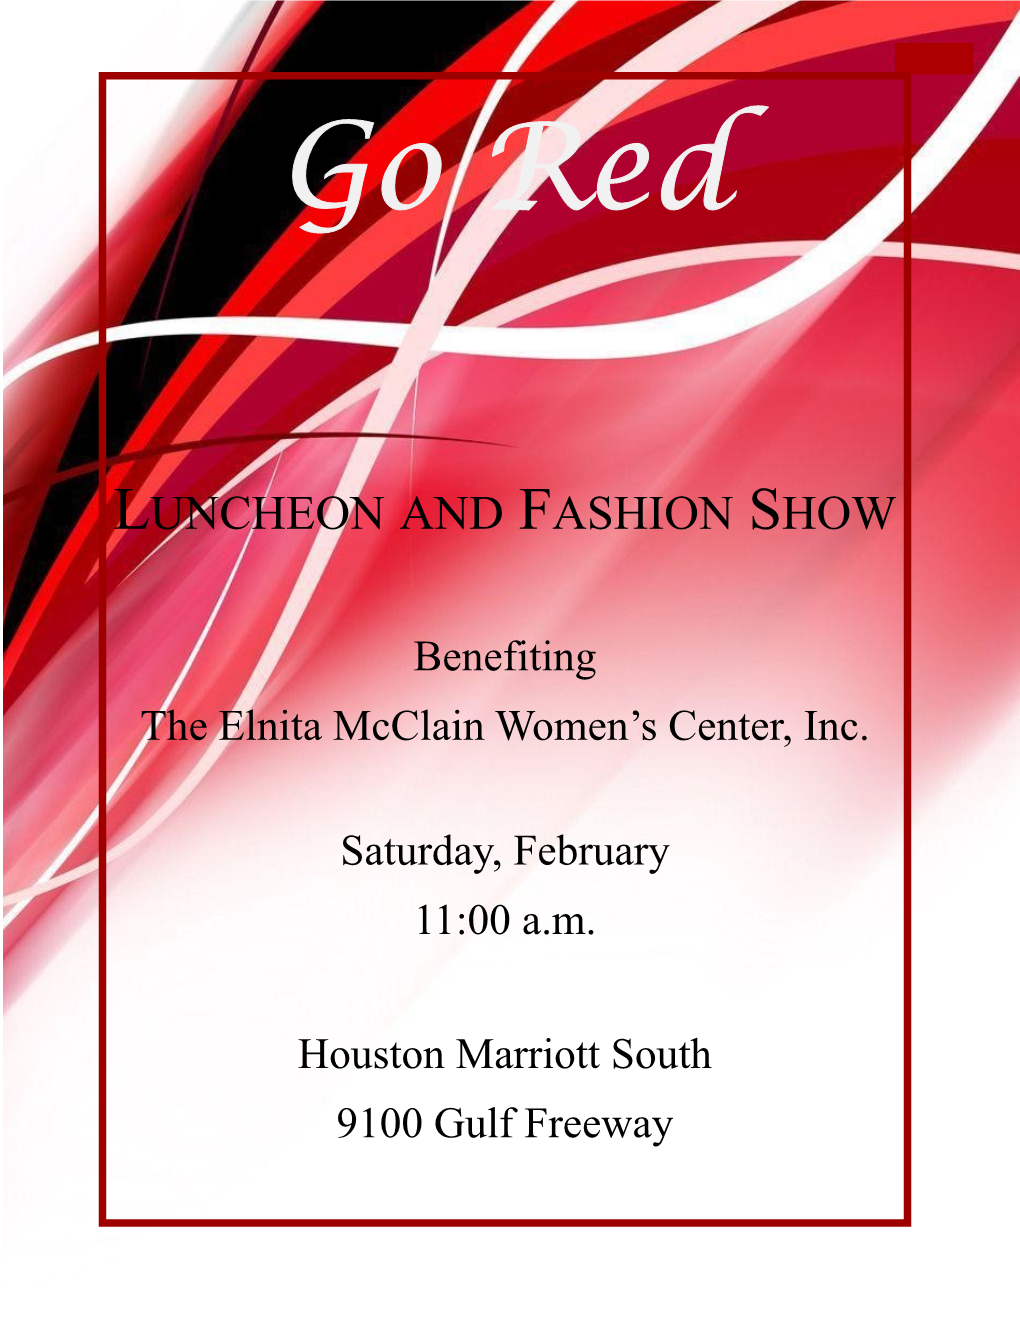 Luncheon and Fashion Show